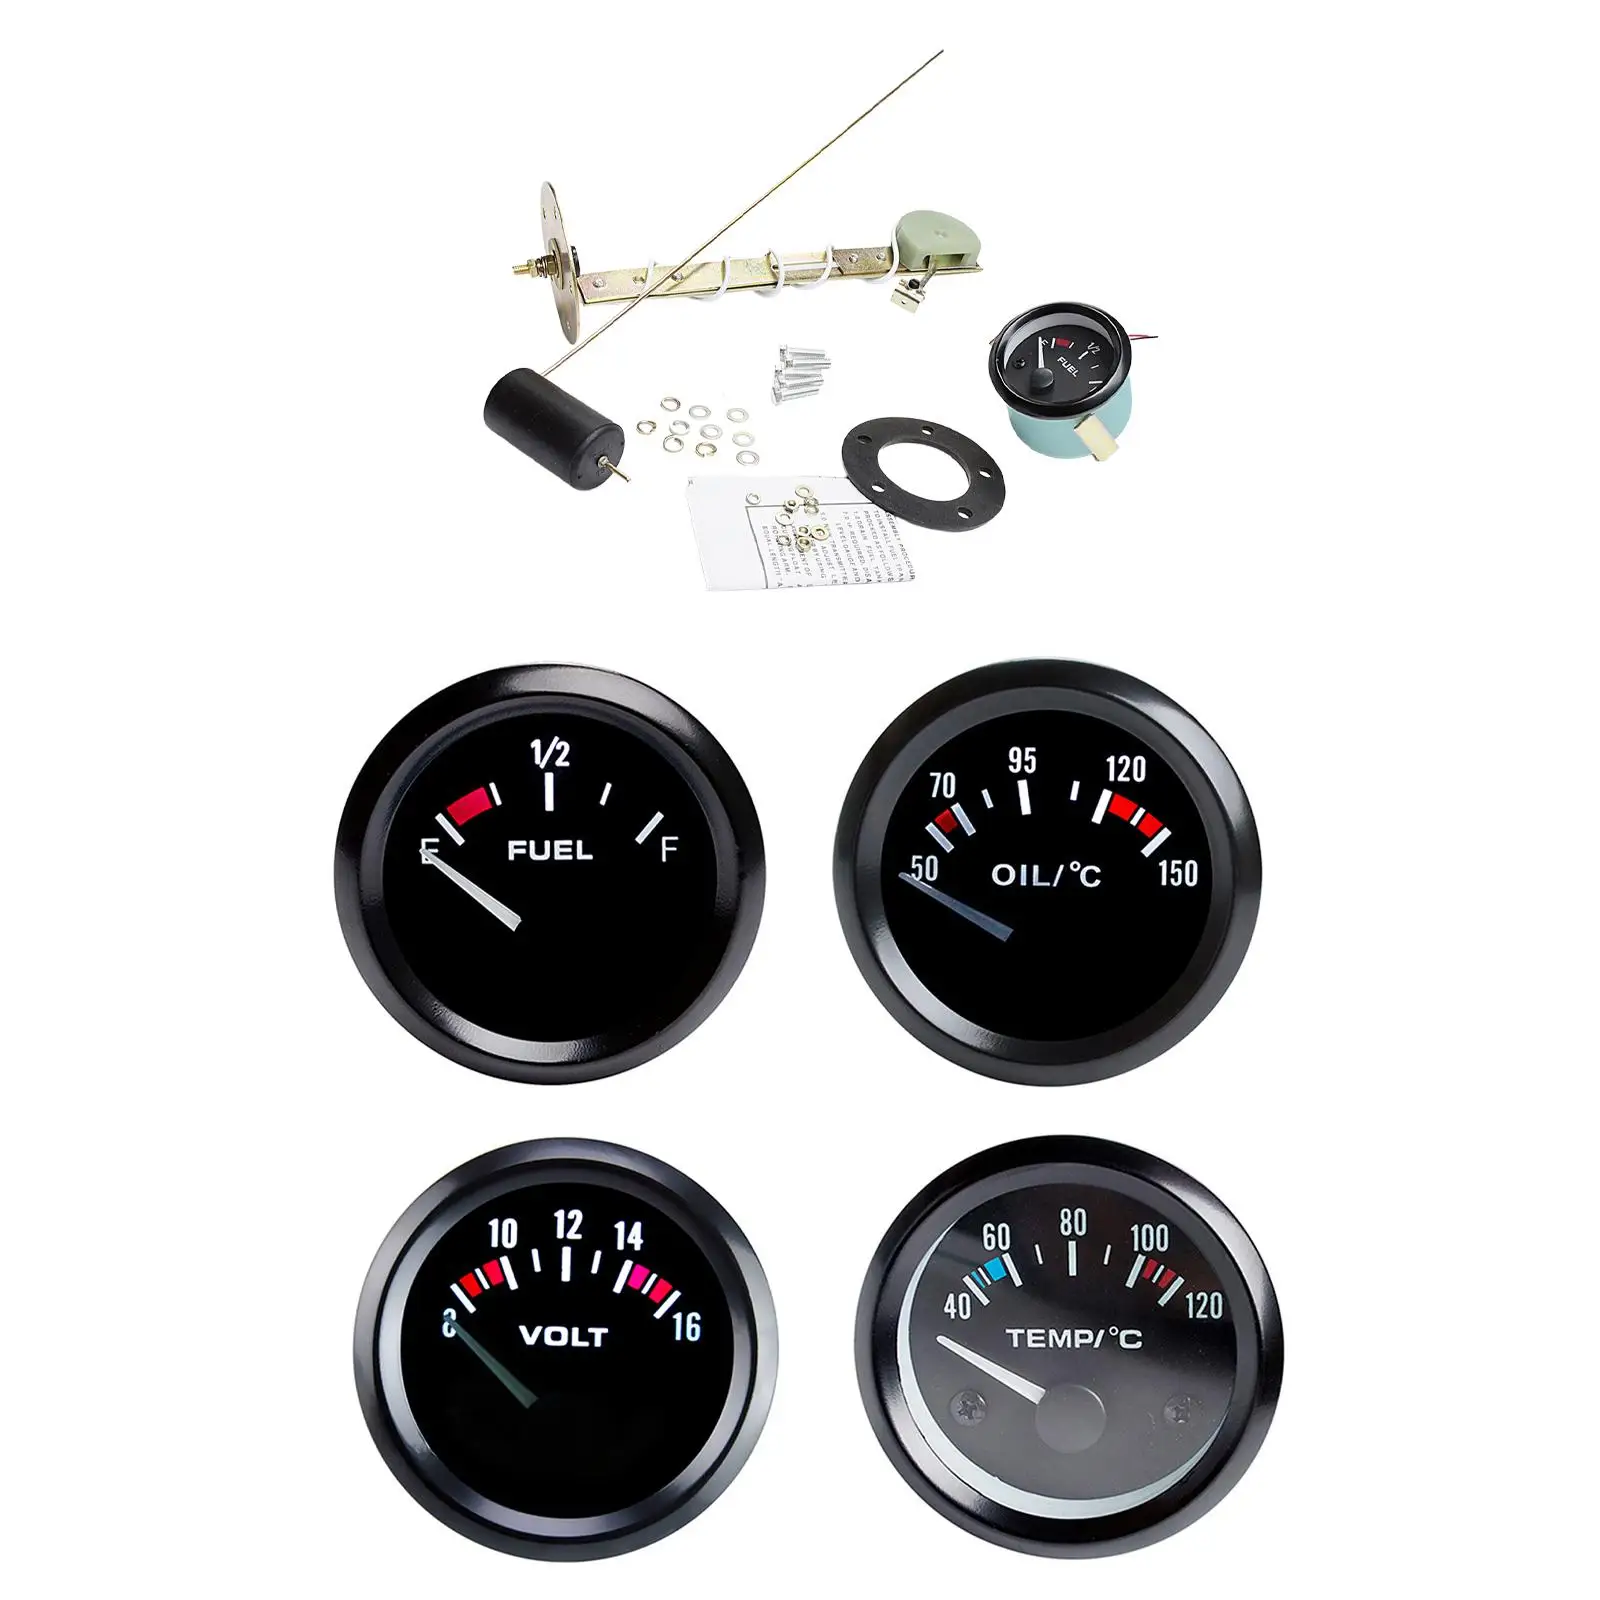 Fuel Gauge Meter Universal Adjustable 52mm 12V 2 inch for Premium High Performance Durable Replaces Car Accessories